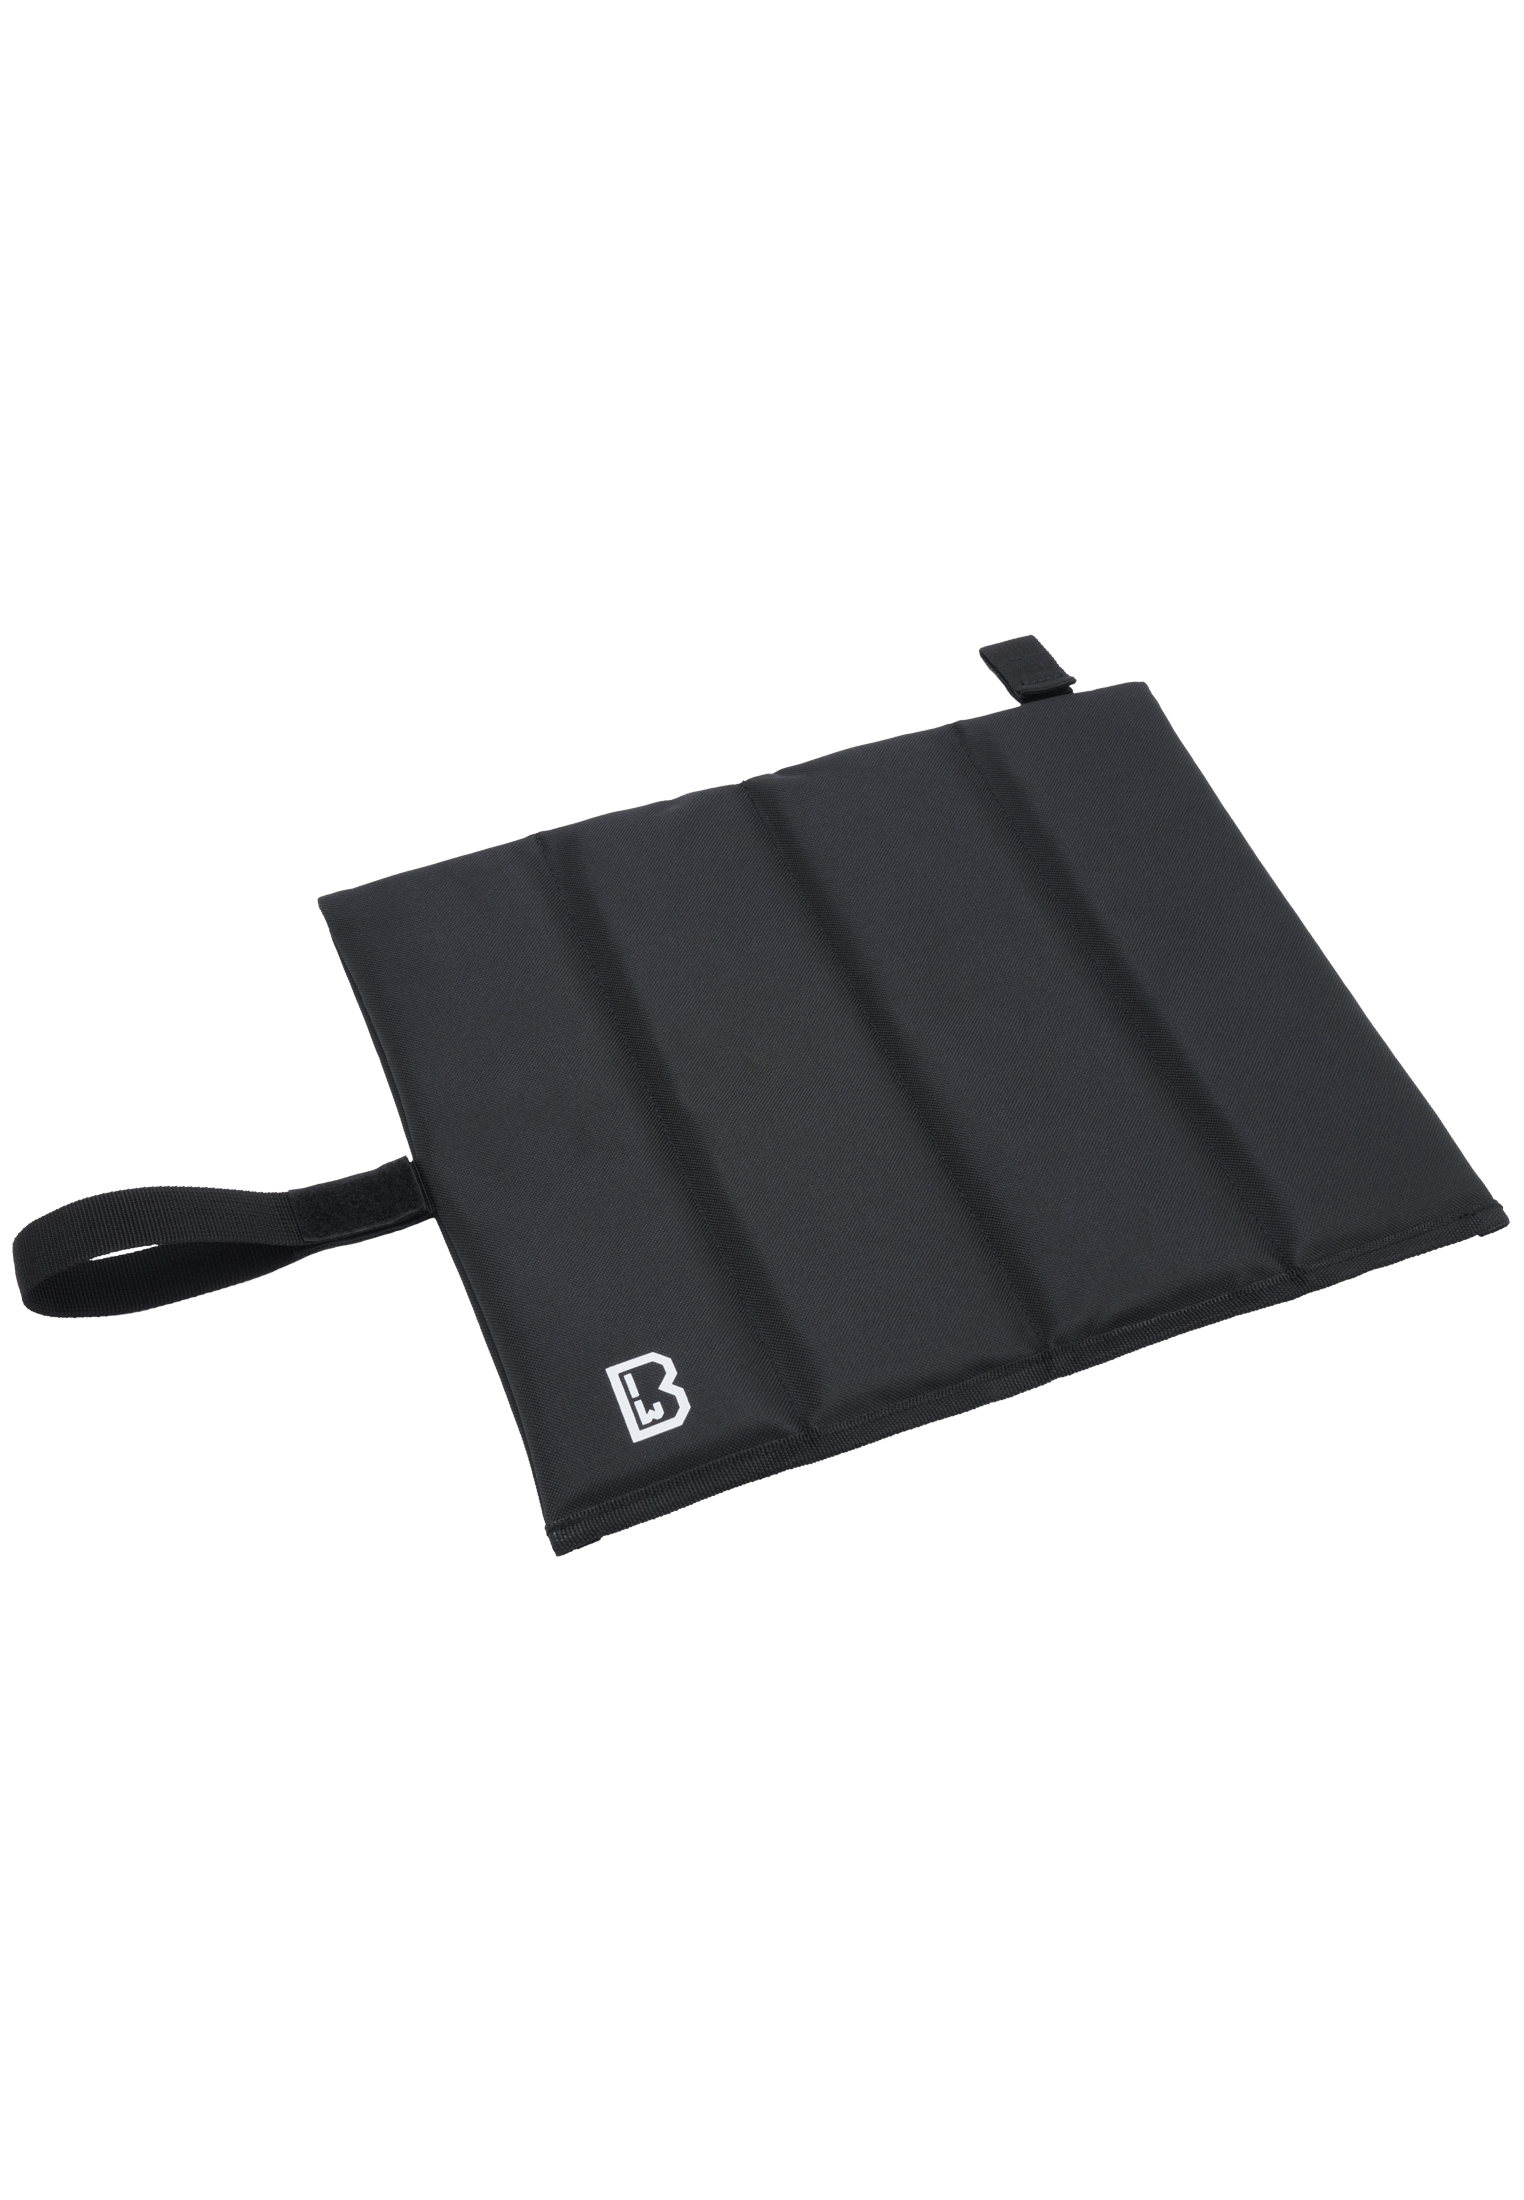 Accessoires Sit Mat Folded in Farbe black